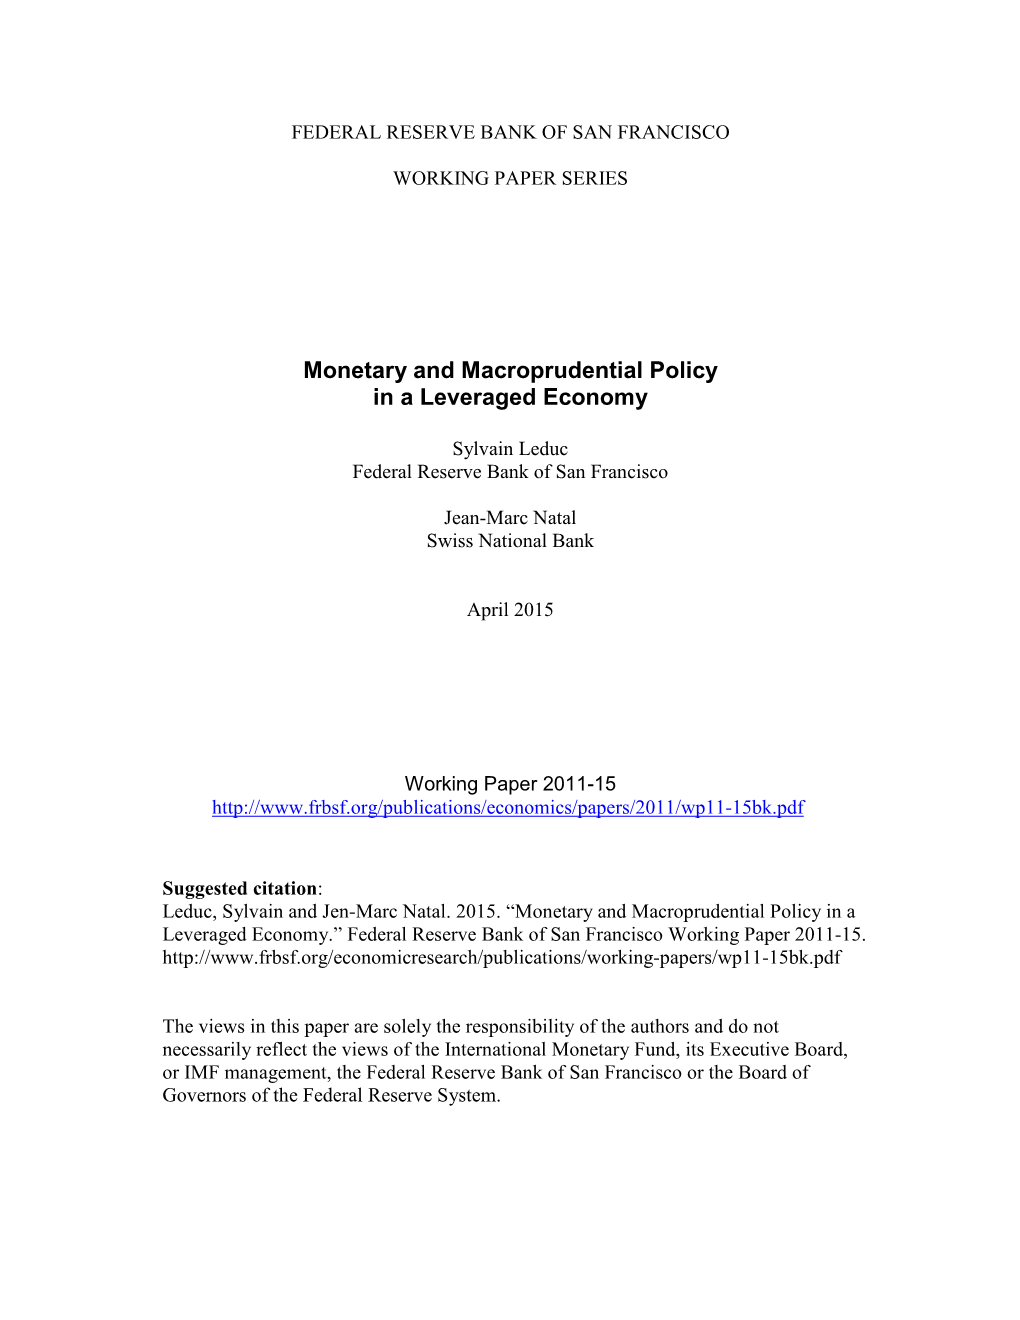 Molnetary and Macroprudential Policy in a Leveraged Economy